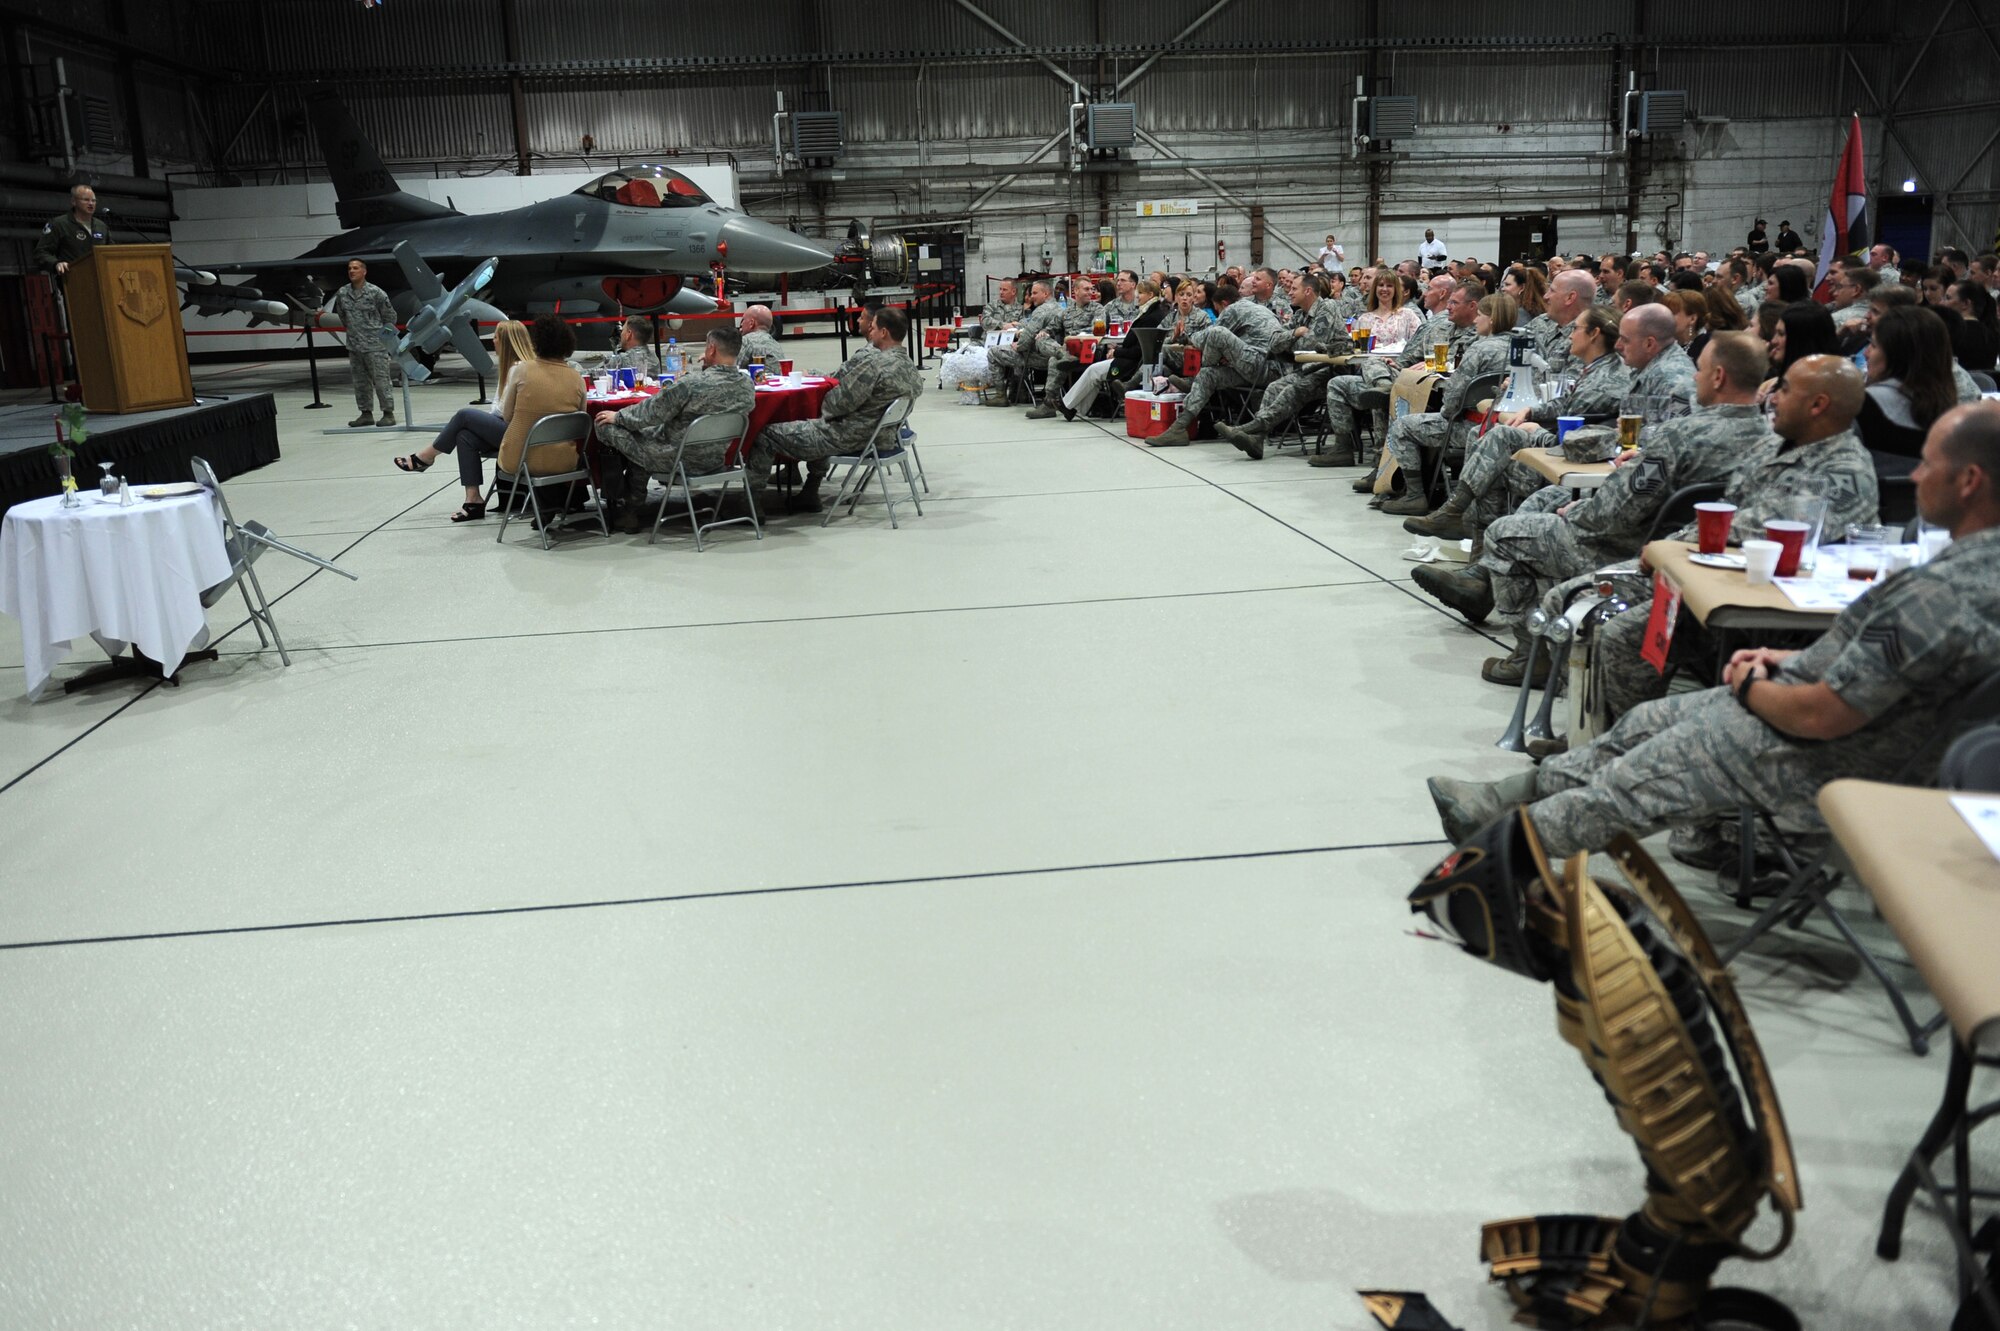 SPANGDAHLEM AIR BASE, Germany – Col. Chris Weggeman, 52nd Fighter Wing commander, speaks during the 2011 Maintenance Professional of the Year banquet at Hangar 1 here April 21. Airmen from the 52nd Maintenance Group and 52nd Munitions Maintenance Group attended the banquet to recognize contributions made by maintenance professionals to mission readiness throughout the year. The banquet also included awards for Airmen and teams who went above and the beyond the established standards for their job performance. (U.S. Air Force photo by Airman 1st Class Matthew B. Fredericks/Released)